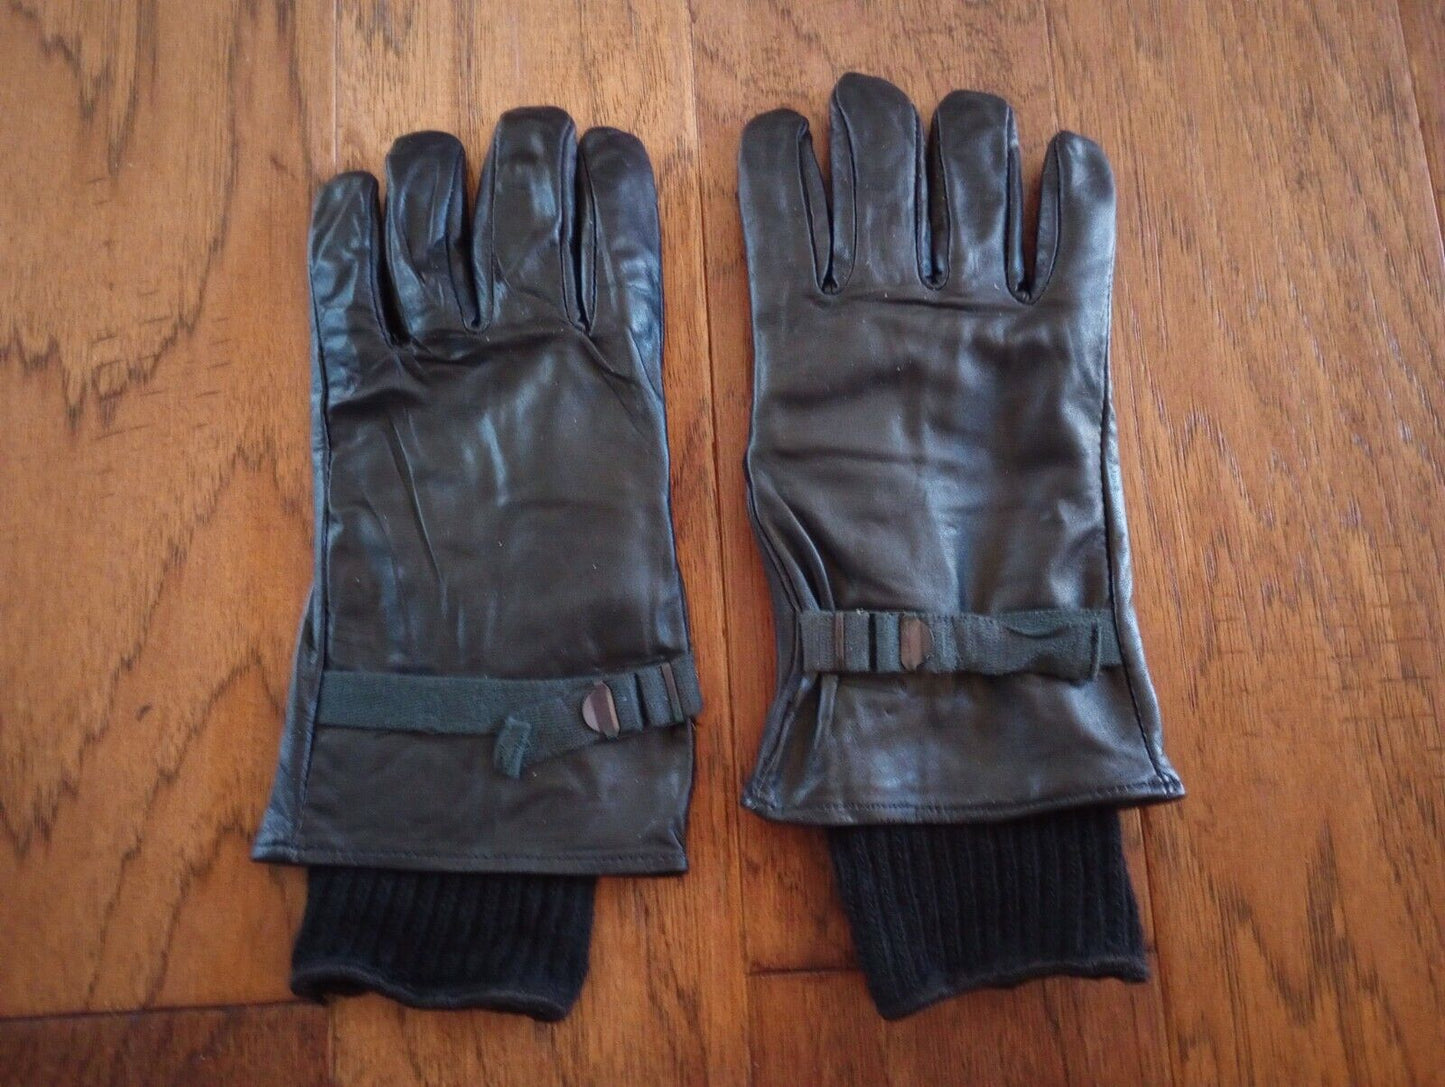 U.S MILITARY STYLE D-3A LEATHER GLOVES LIGHT WEIGHT SIZE 5 LARGE W/LINER